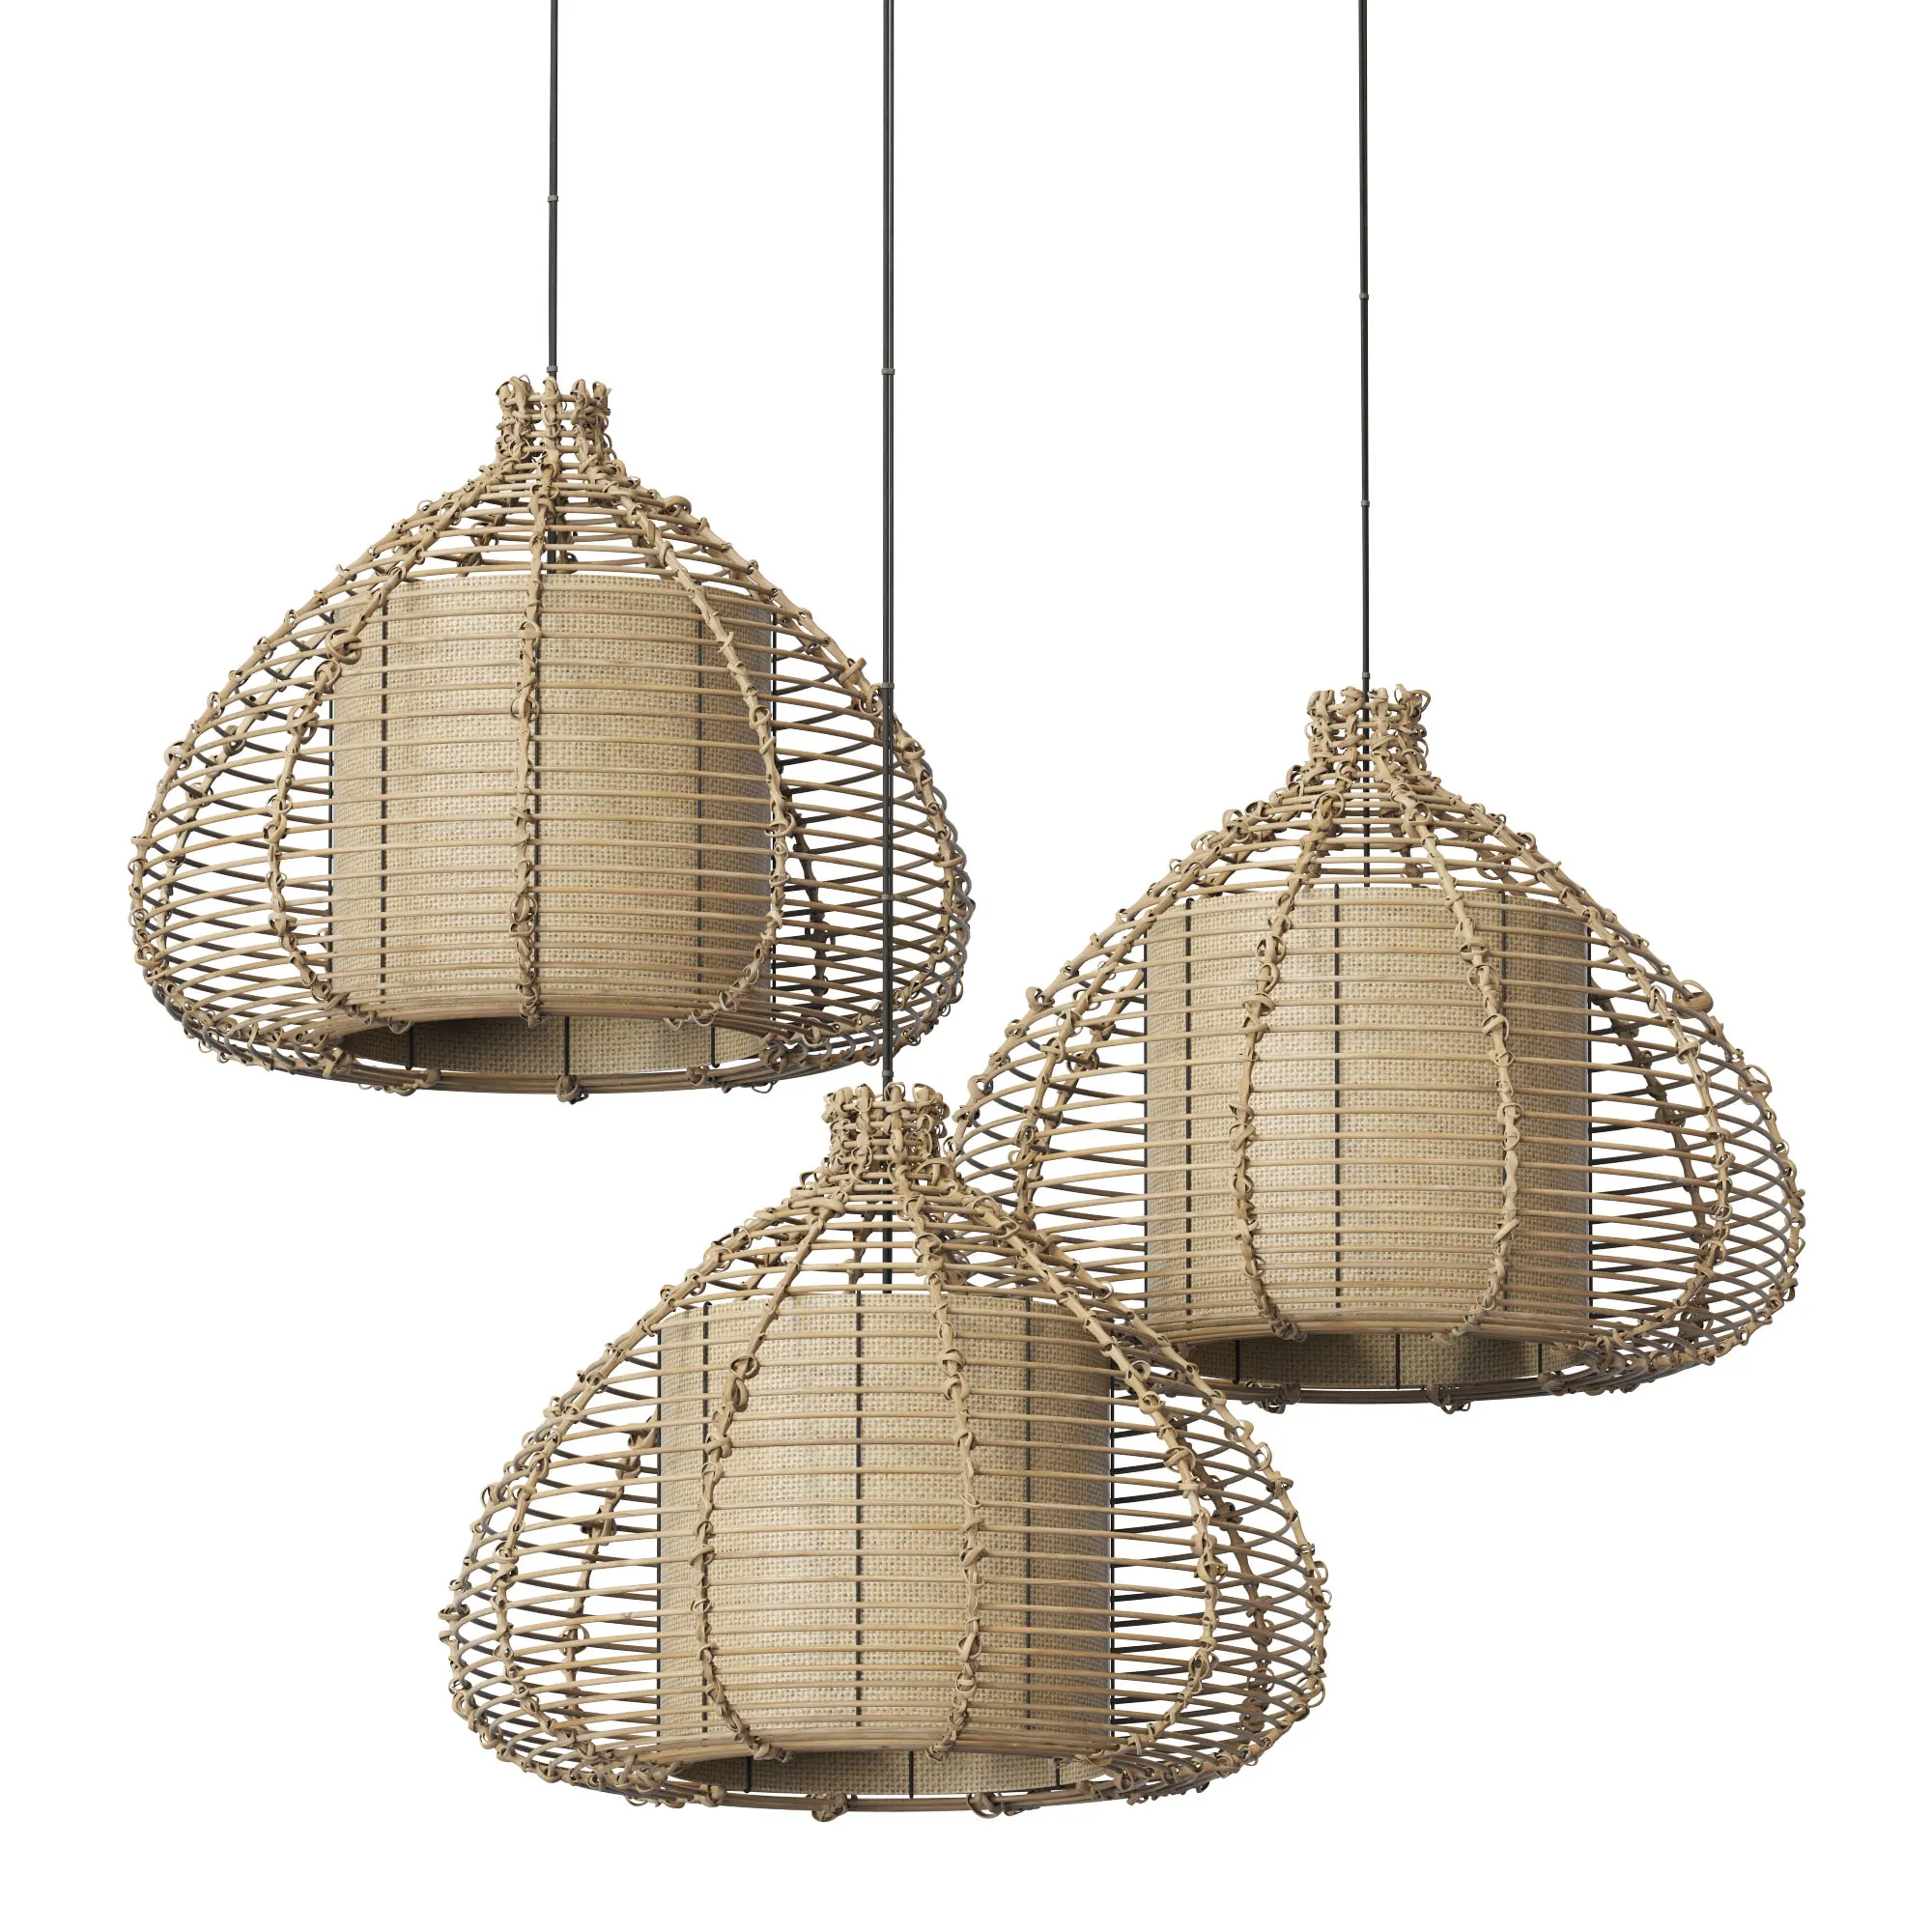 Lamp wicker branch rattan dome Cone 3D model download on cg.market 3ds max, V-Ray